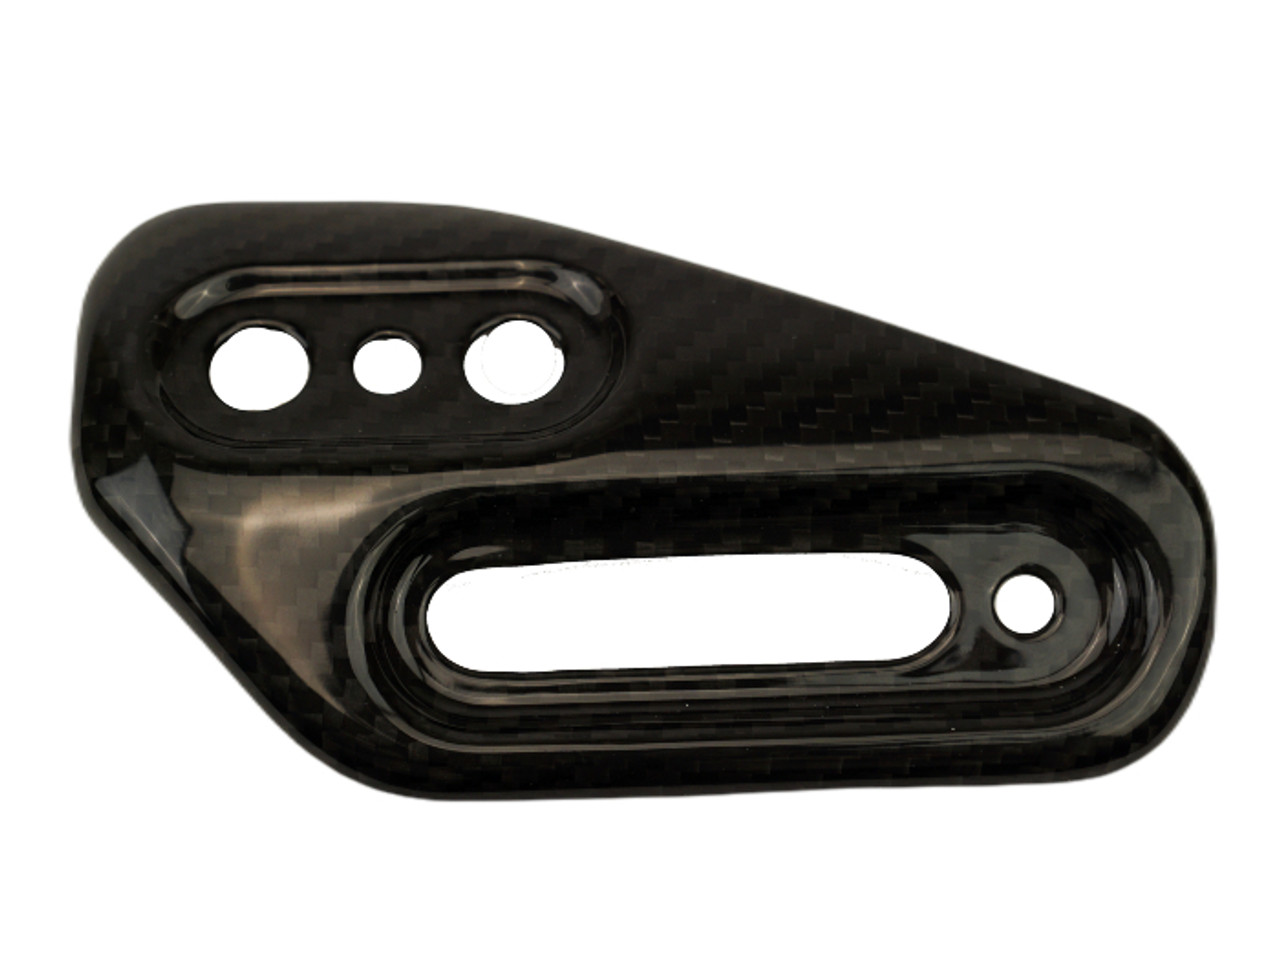 Rear Exhaust Cover in Glossy Twill Weave Carbon Fiber for Yamaha Tenere 700

